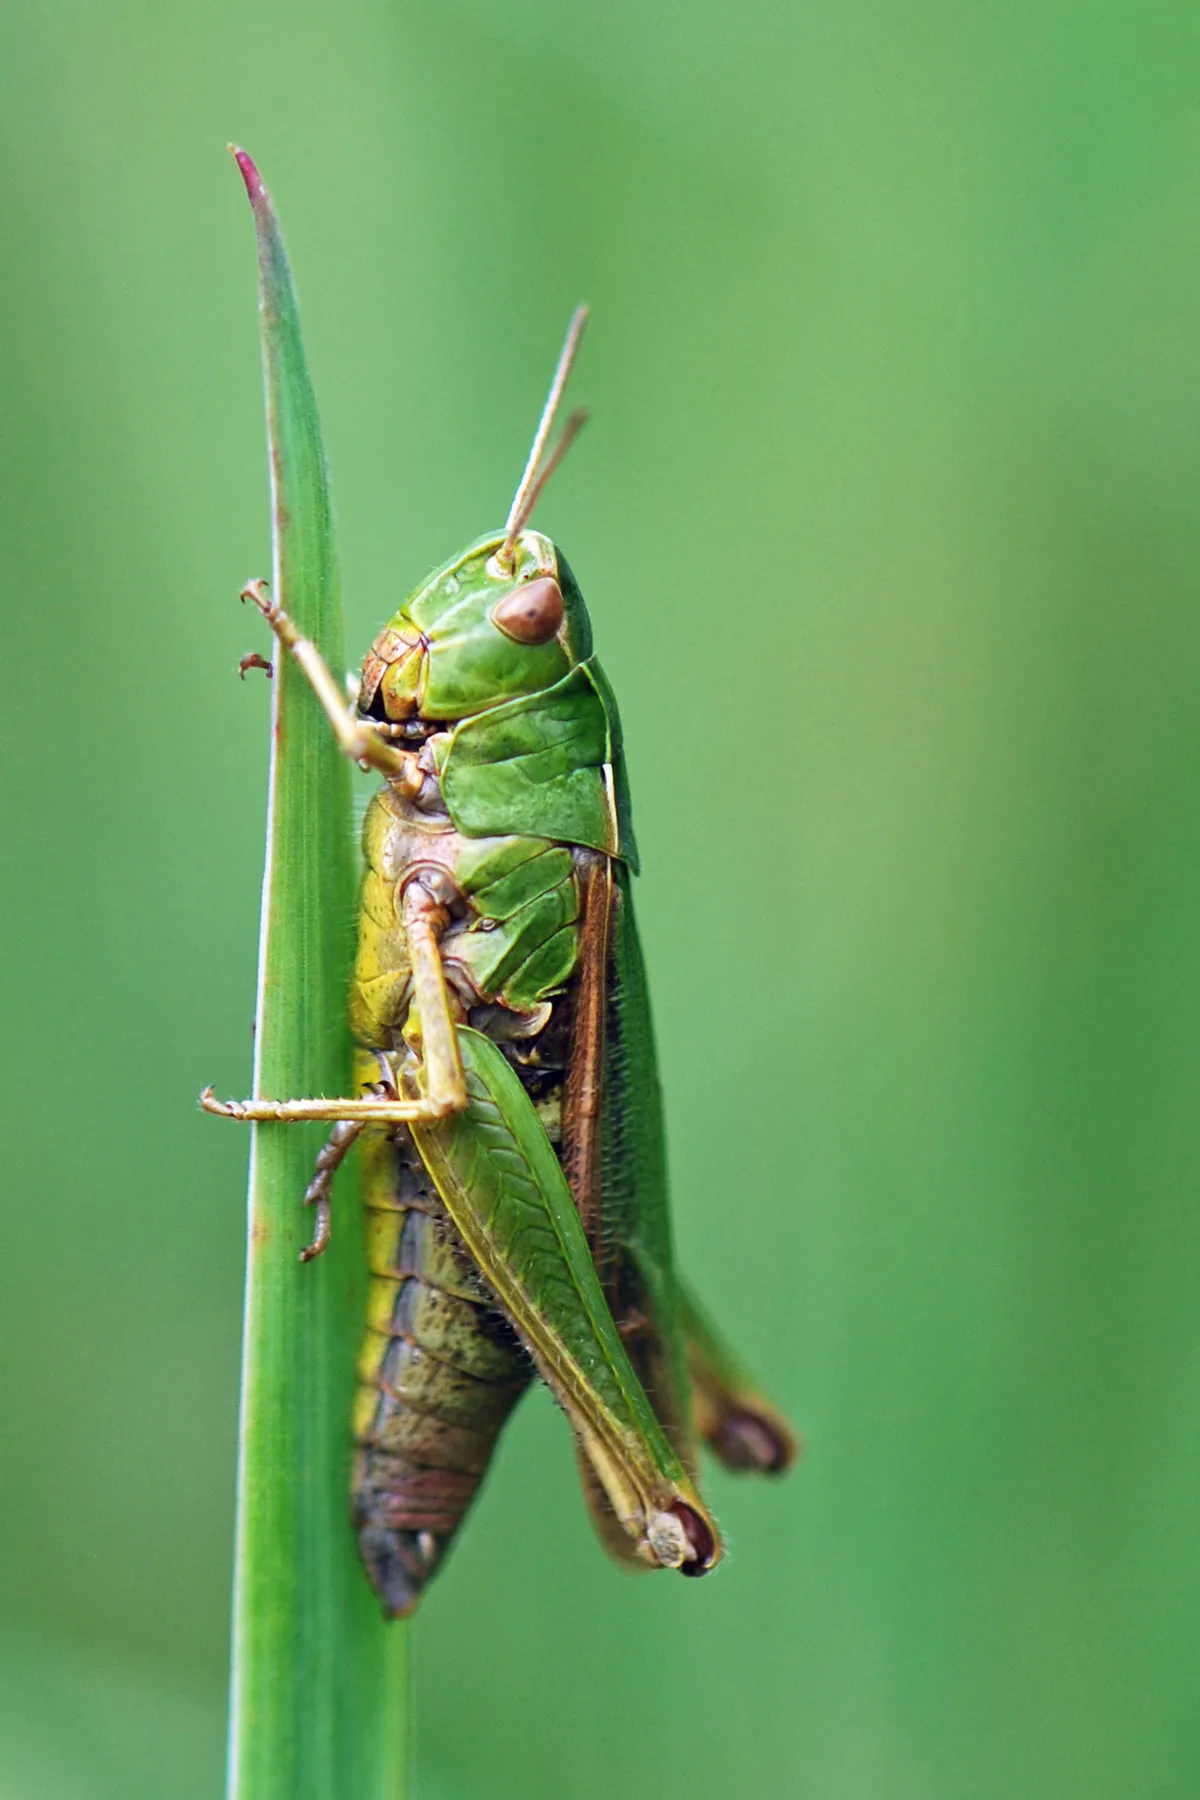 Upright close-up shot of a common green grasshopper on a blade of grass